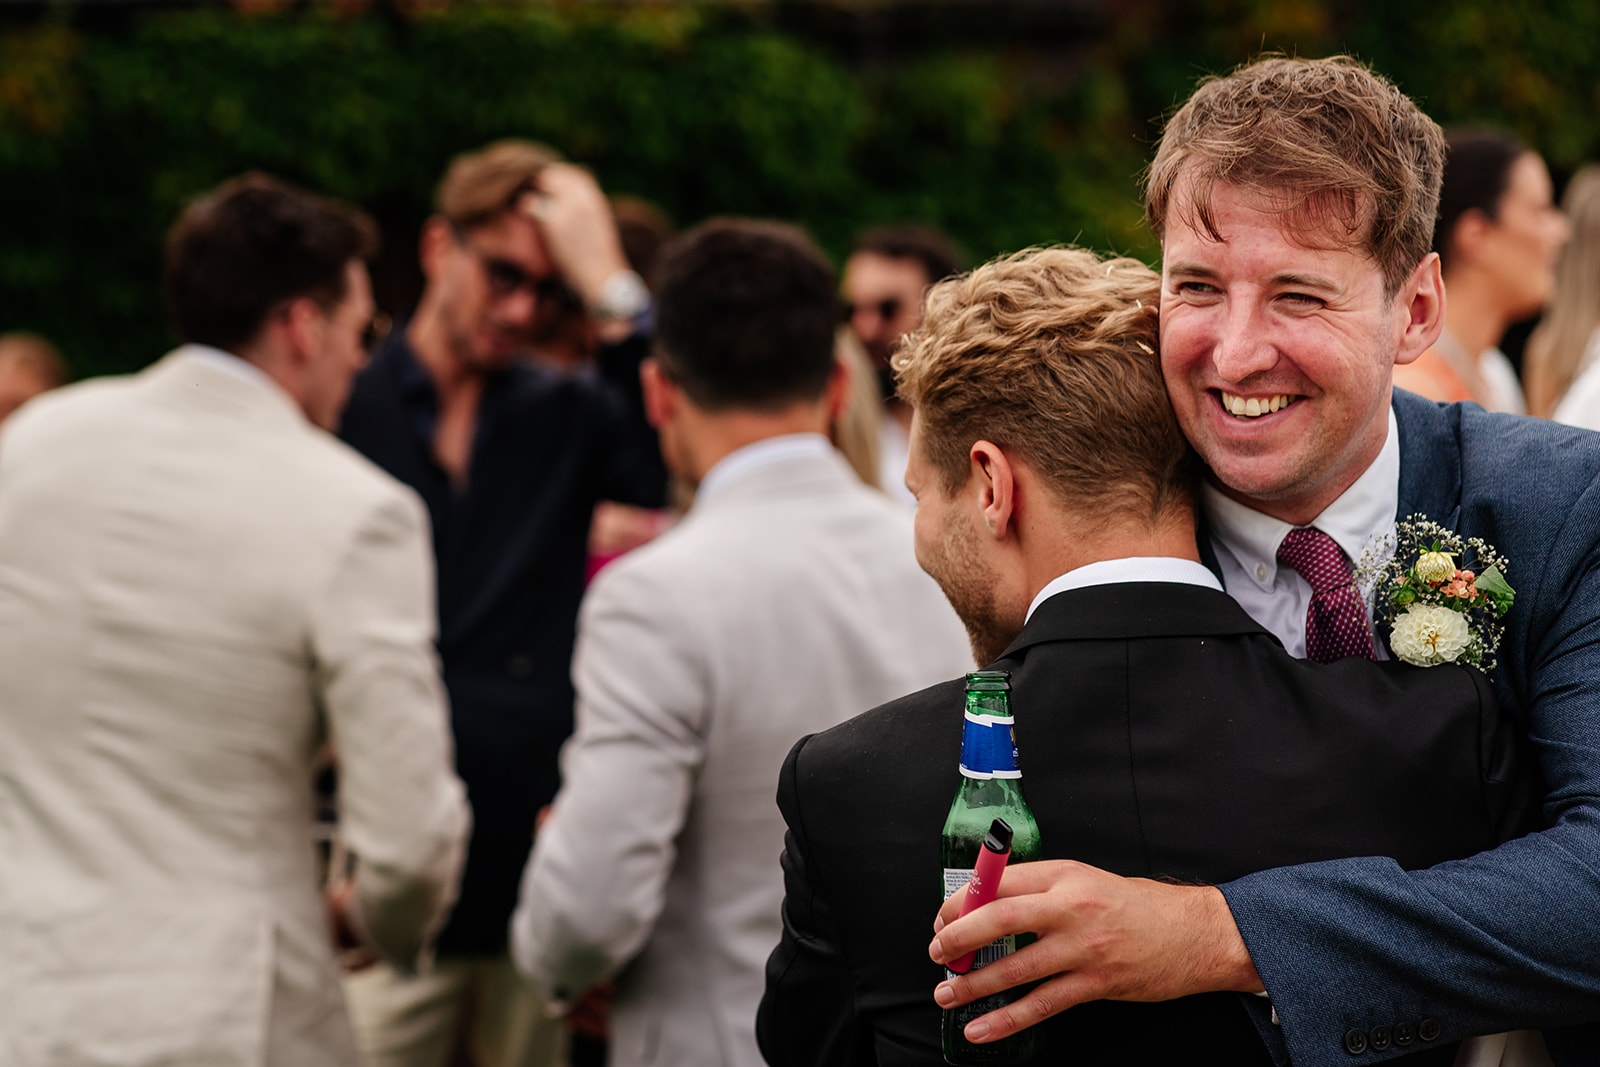 Guest hugging groom following the wedding ceremony 